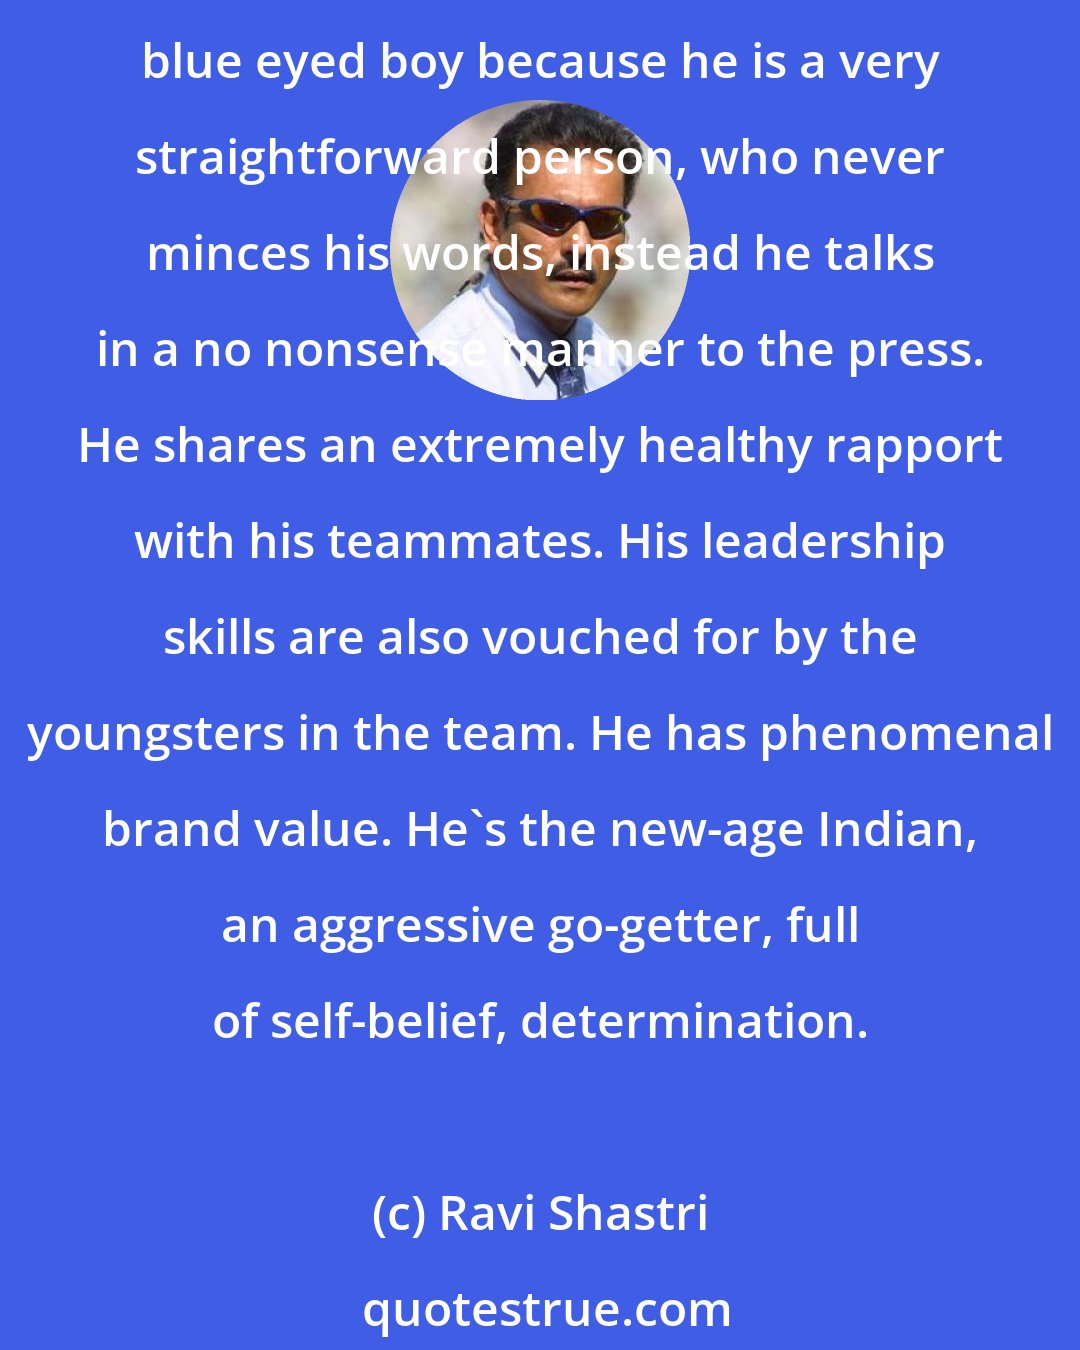 Ravi Shastri: Sourav's greatest asset is his ability to communicate. He is a naturally very confident person. He encourages his team, is a great motivator and a born captain. He is not the media's blue eyed boy because he is a very straightforward person, who never minces his words, instead he talks in a no nonsense manner to the press. He shares an extremely healthy rapport with his teammates. His leadership skills are also vouched for by the youngsters in the team. He has phenomenal brand value. He's the new-age Indian, an aggressive go-getter, full of self-belief, determination.